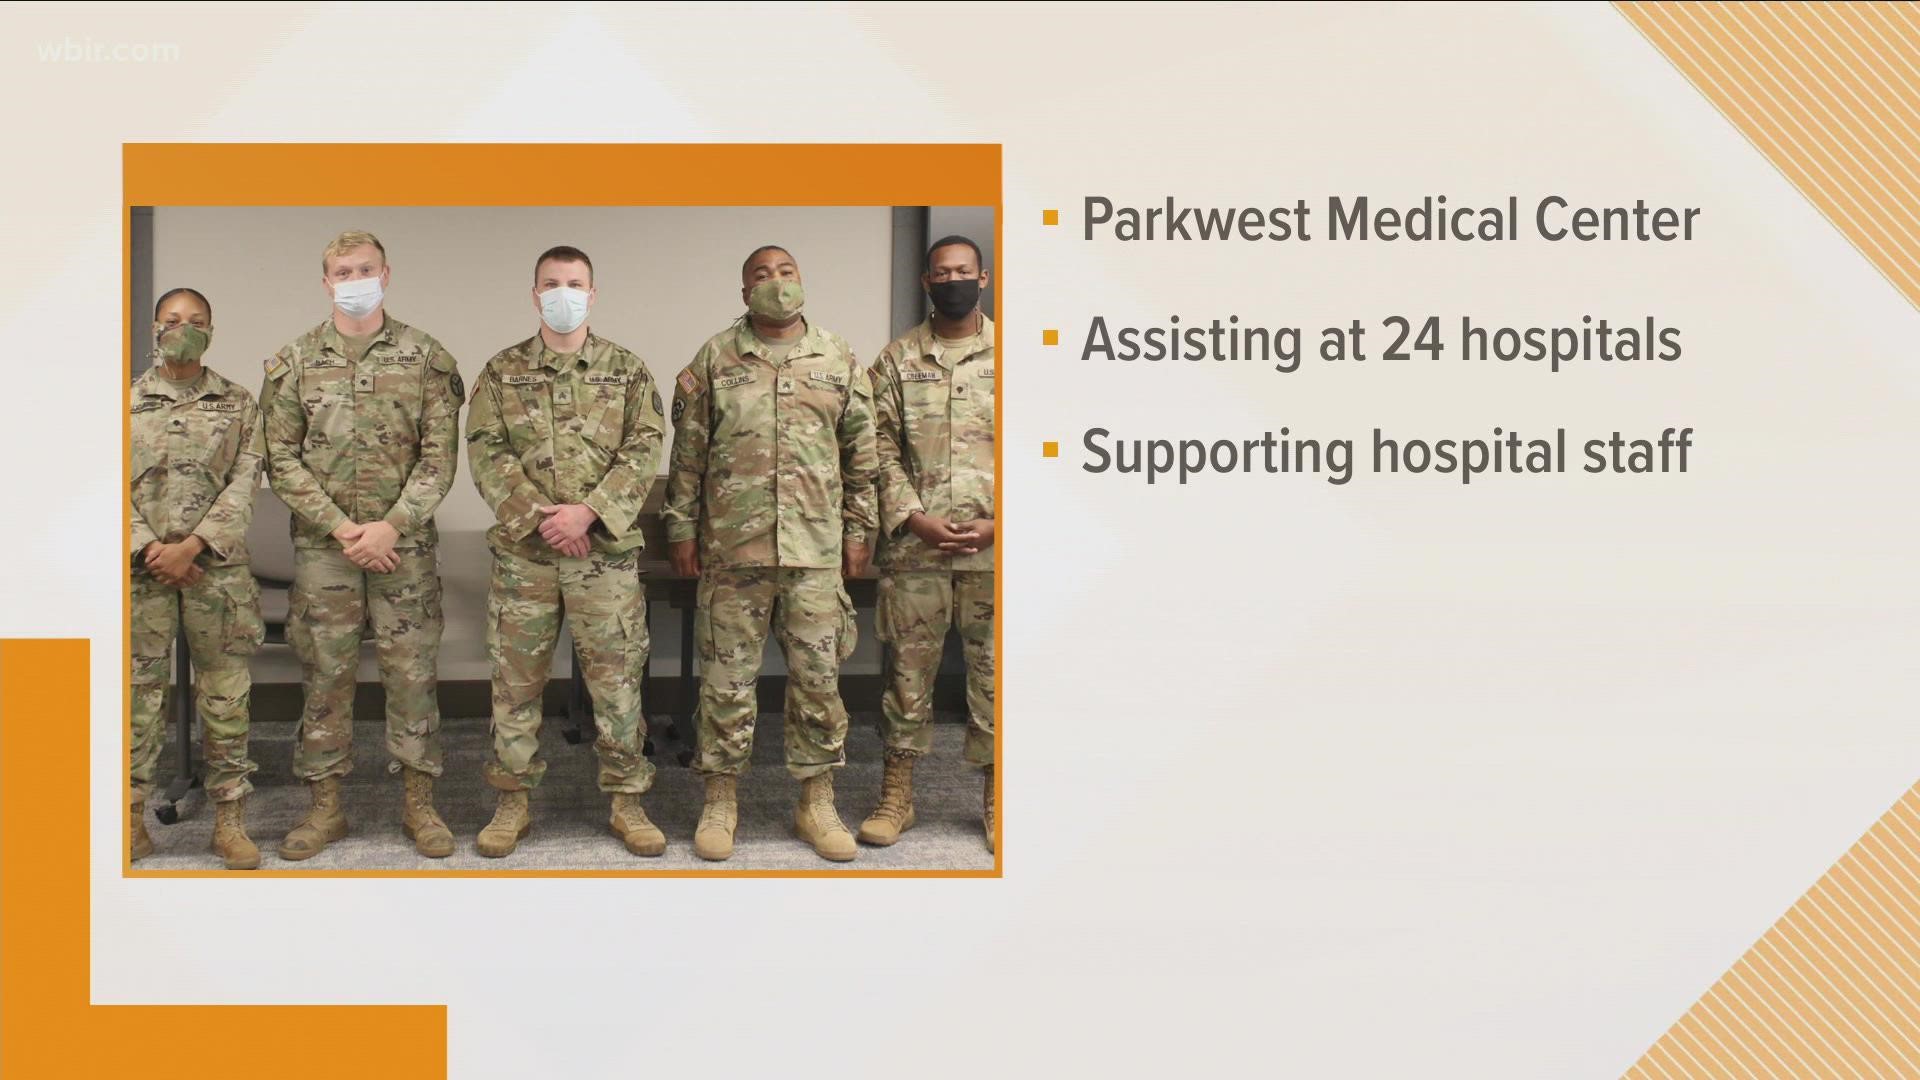 The Tennessee National Guard says they are helping 24 hospitals.